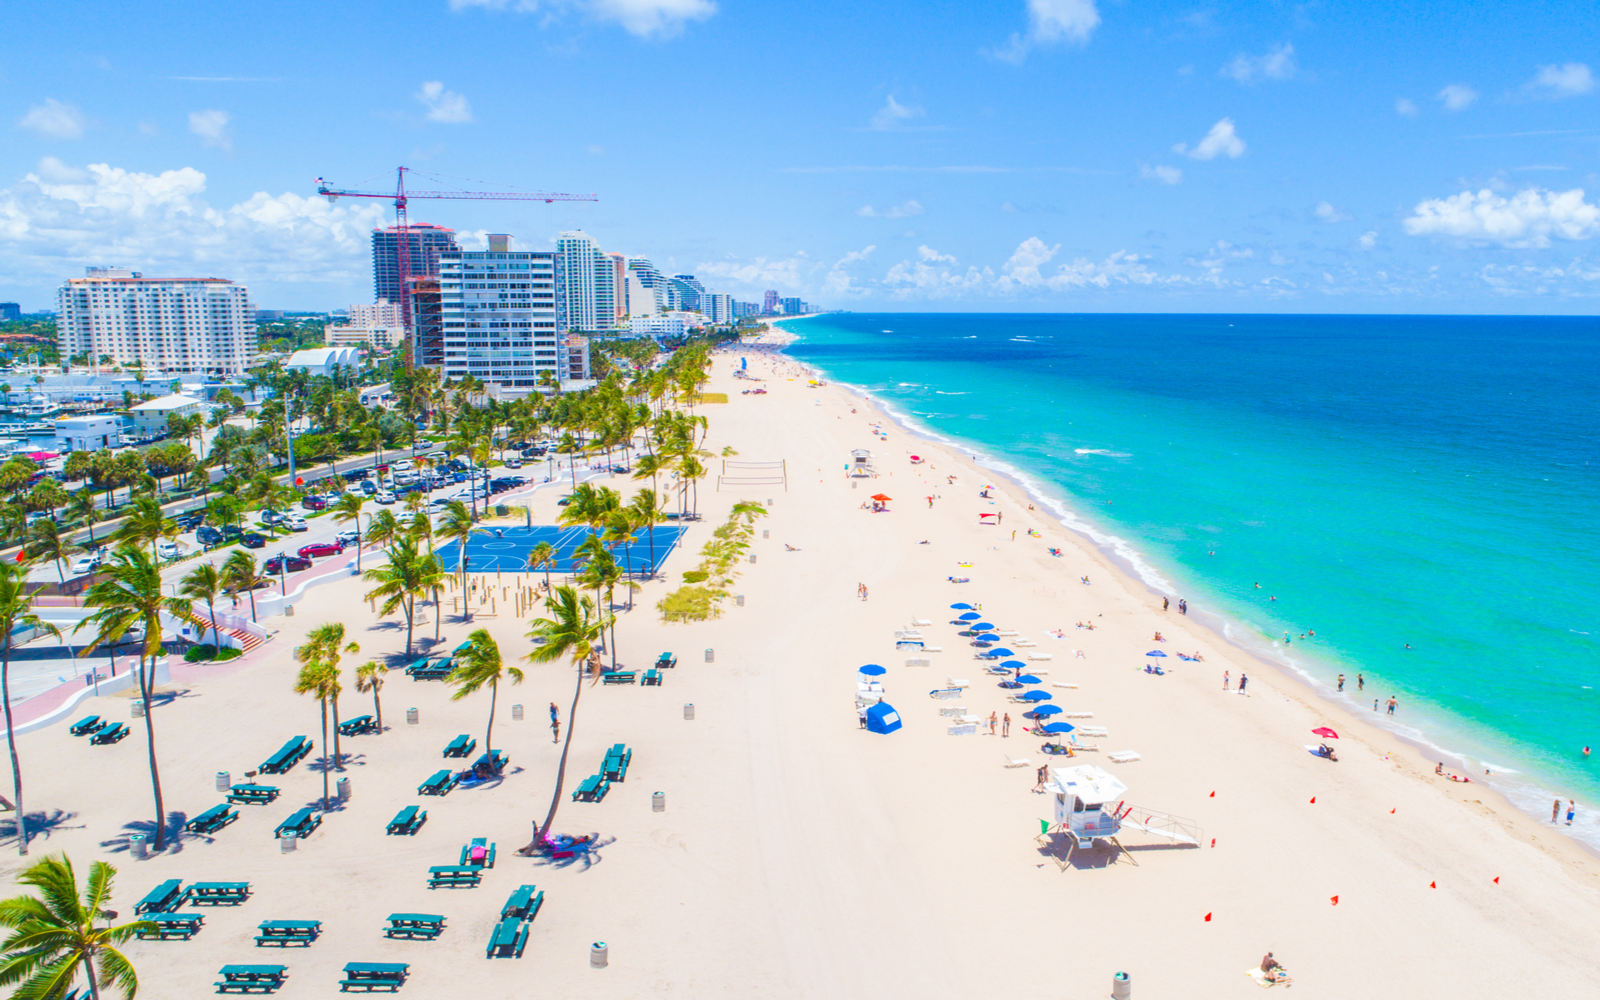 22 Best Things to Do in Fort Lauderdale in 2022